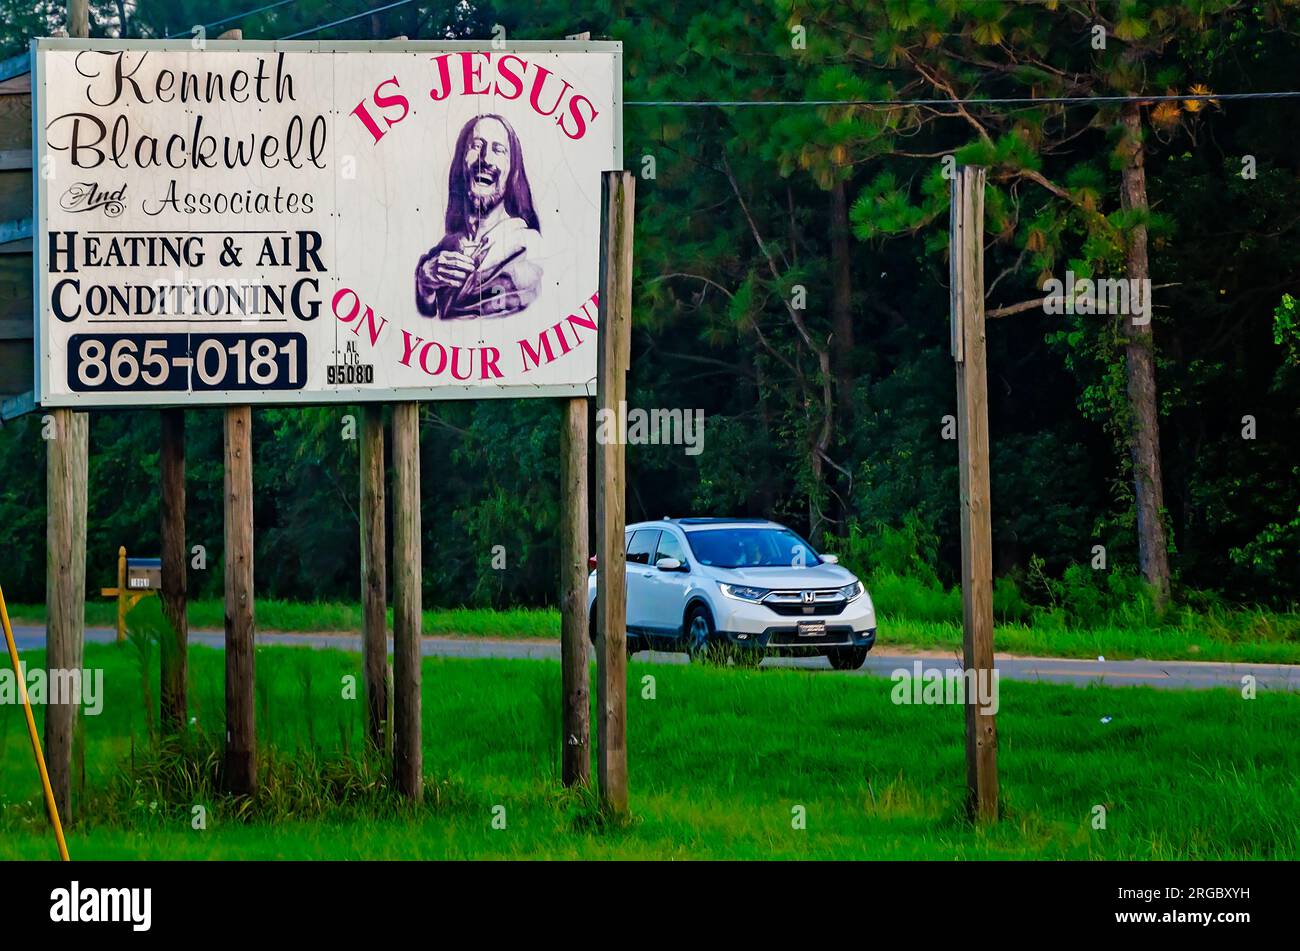 A religious message and picture of Jesus accompany an advertisement for a local repair service, Aug. 4, 2023, in Grand Bay, Alabama. Stock Photo